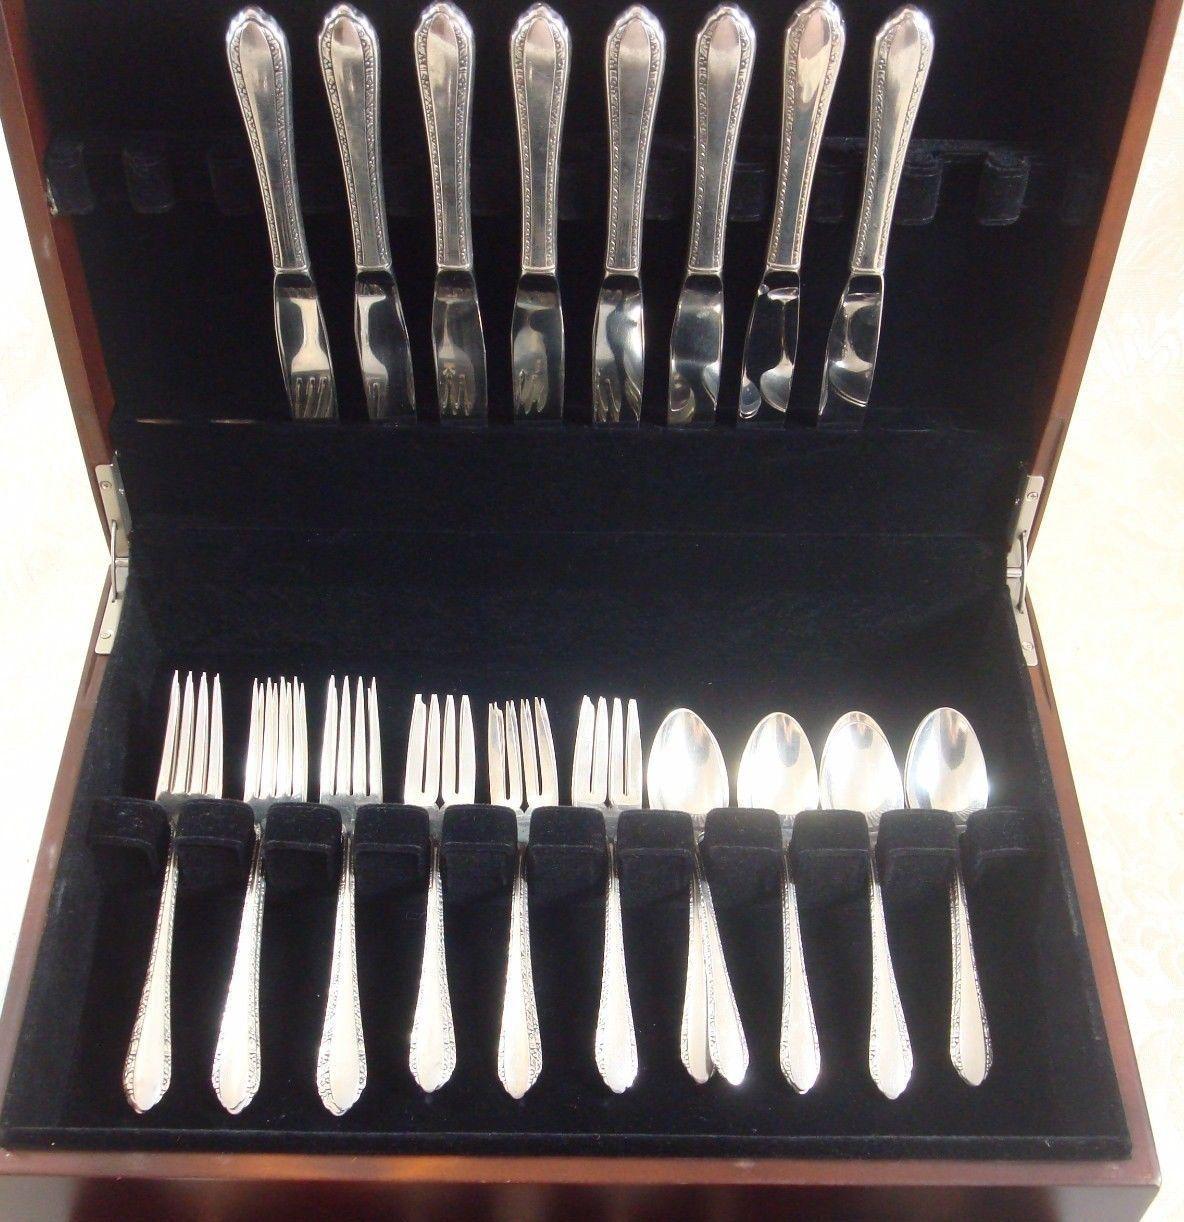 Wildflower by Royal Crest timeless sterling silver flatware set - 32 pieces. This set includes:

Eight knives, 9 1/8